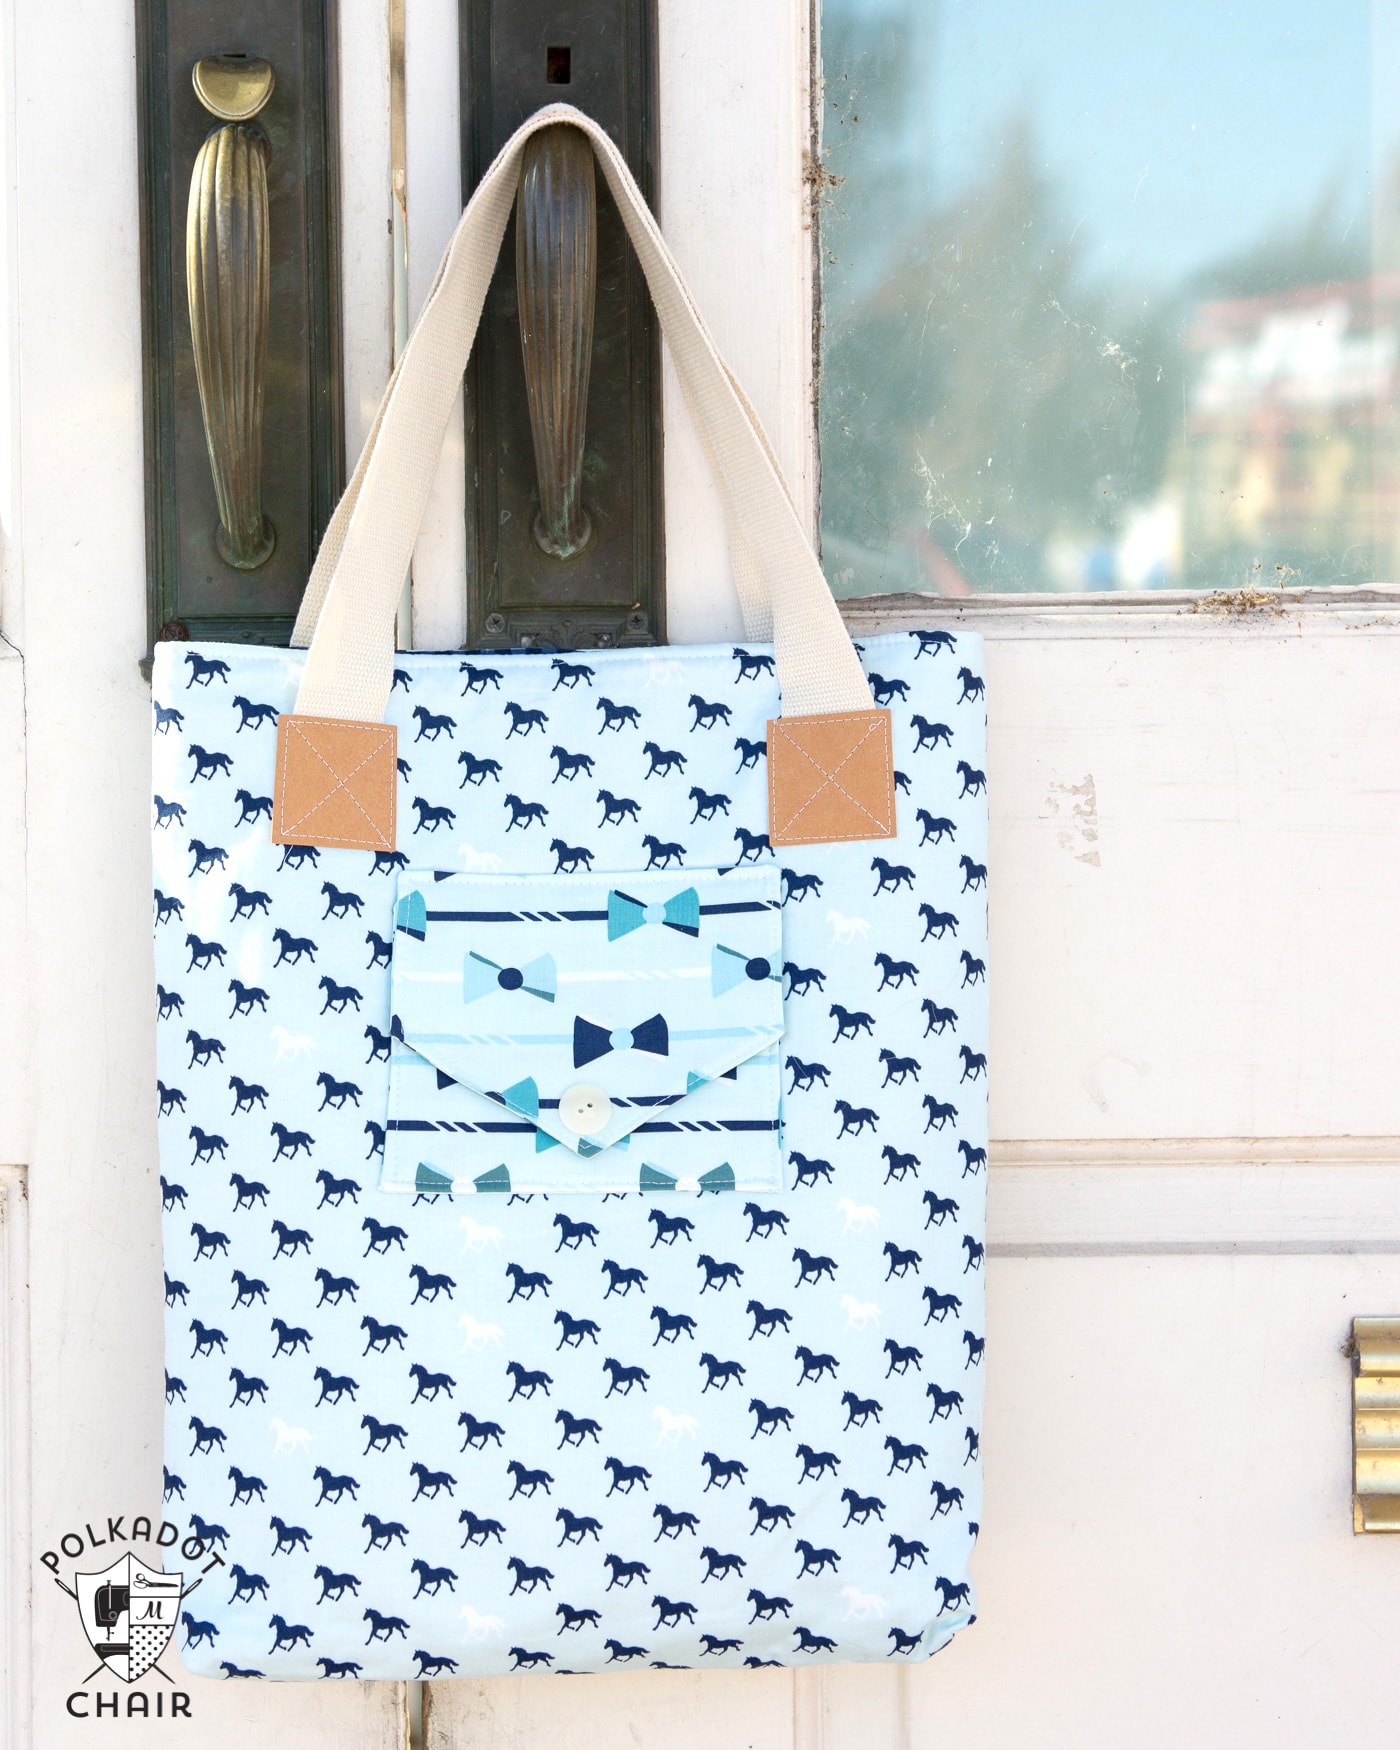 The Derby Tote Bag Sewing Pattern; great simple and versatile tote bag pattern that features 3 different front pocket styles. Great project for a beginning sewist. 